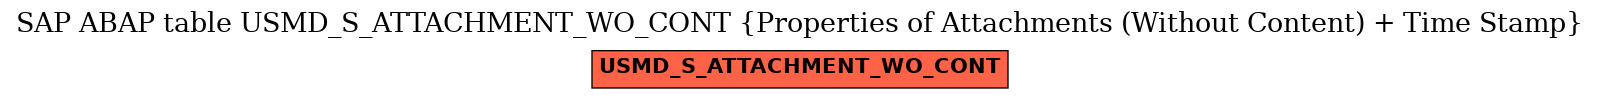 E-R Diagram for table USMD_S_ATTACHMENT_WO_CONT (Properties of Attachments (Without Content) + Time Stamp)